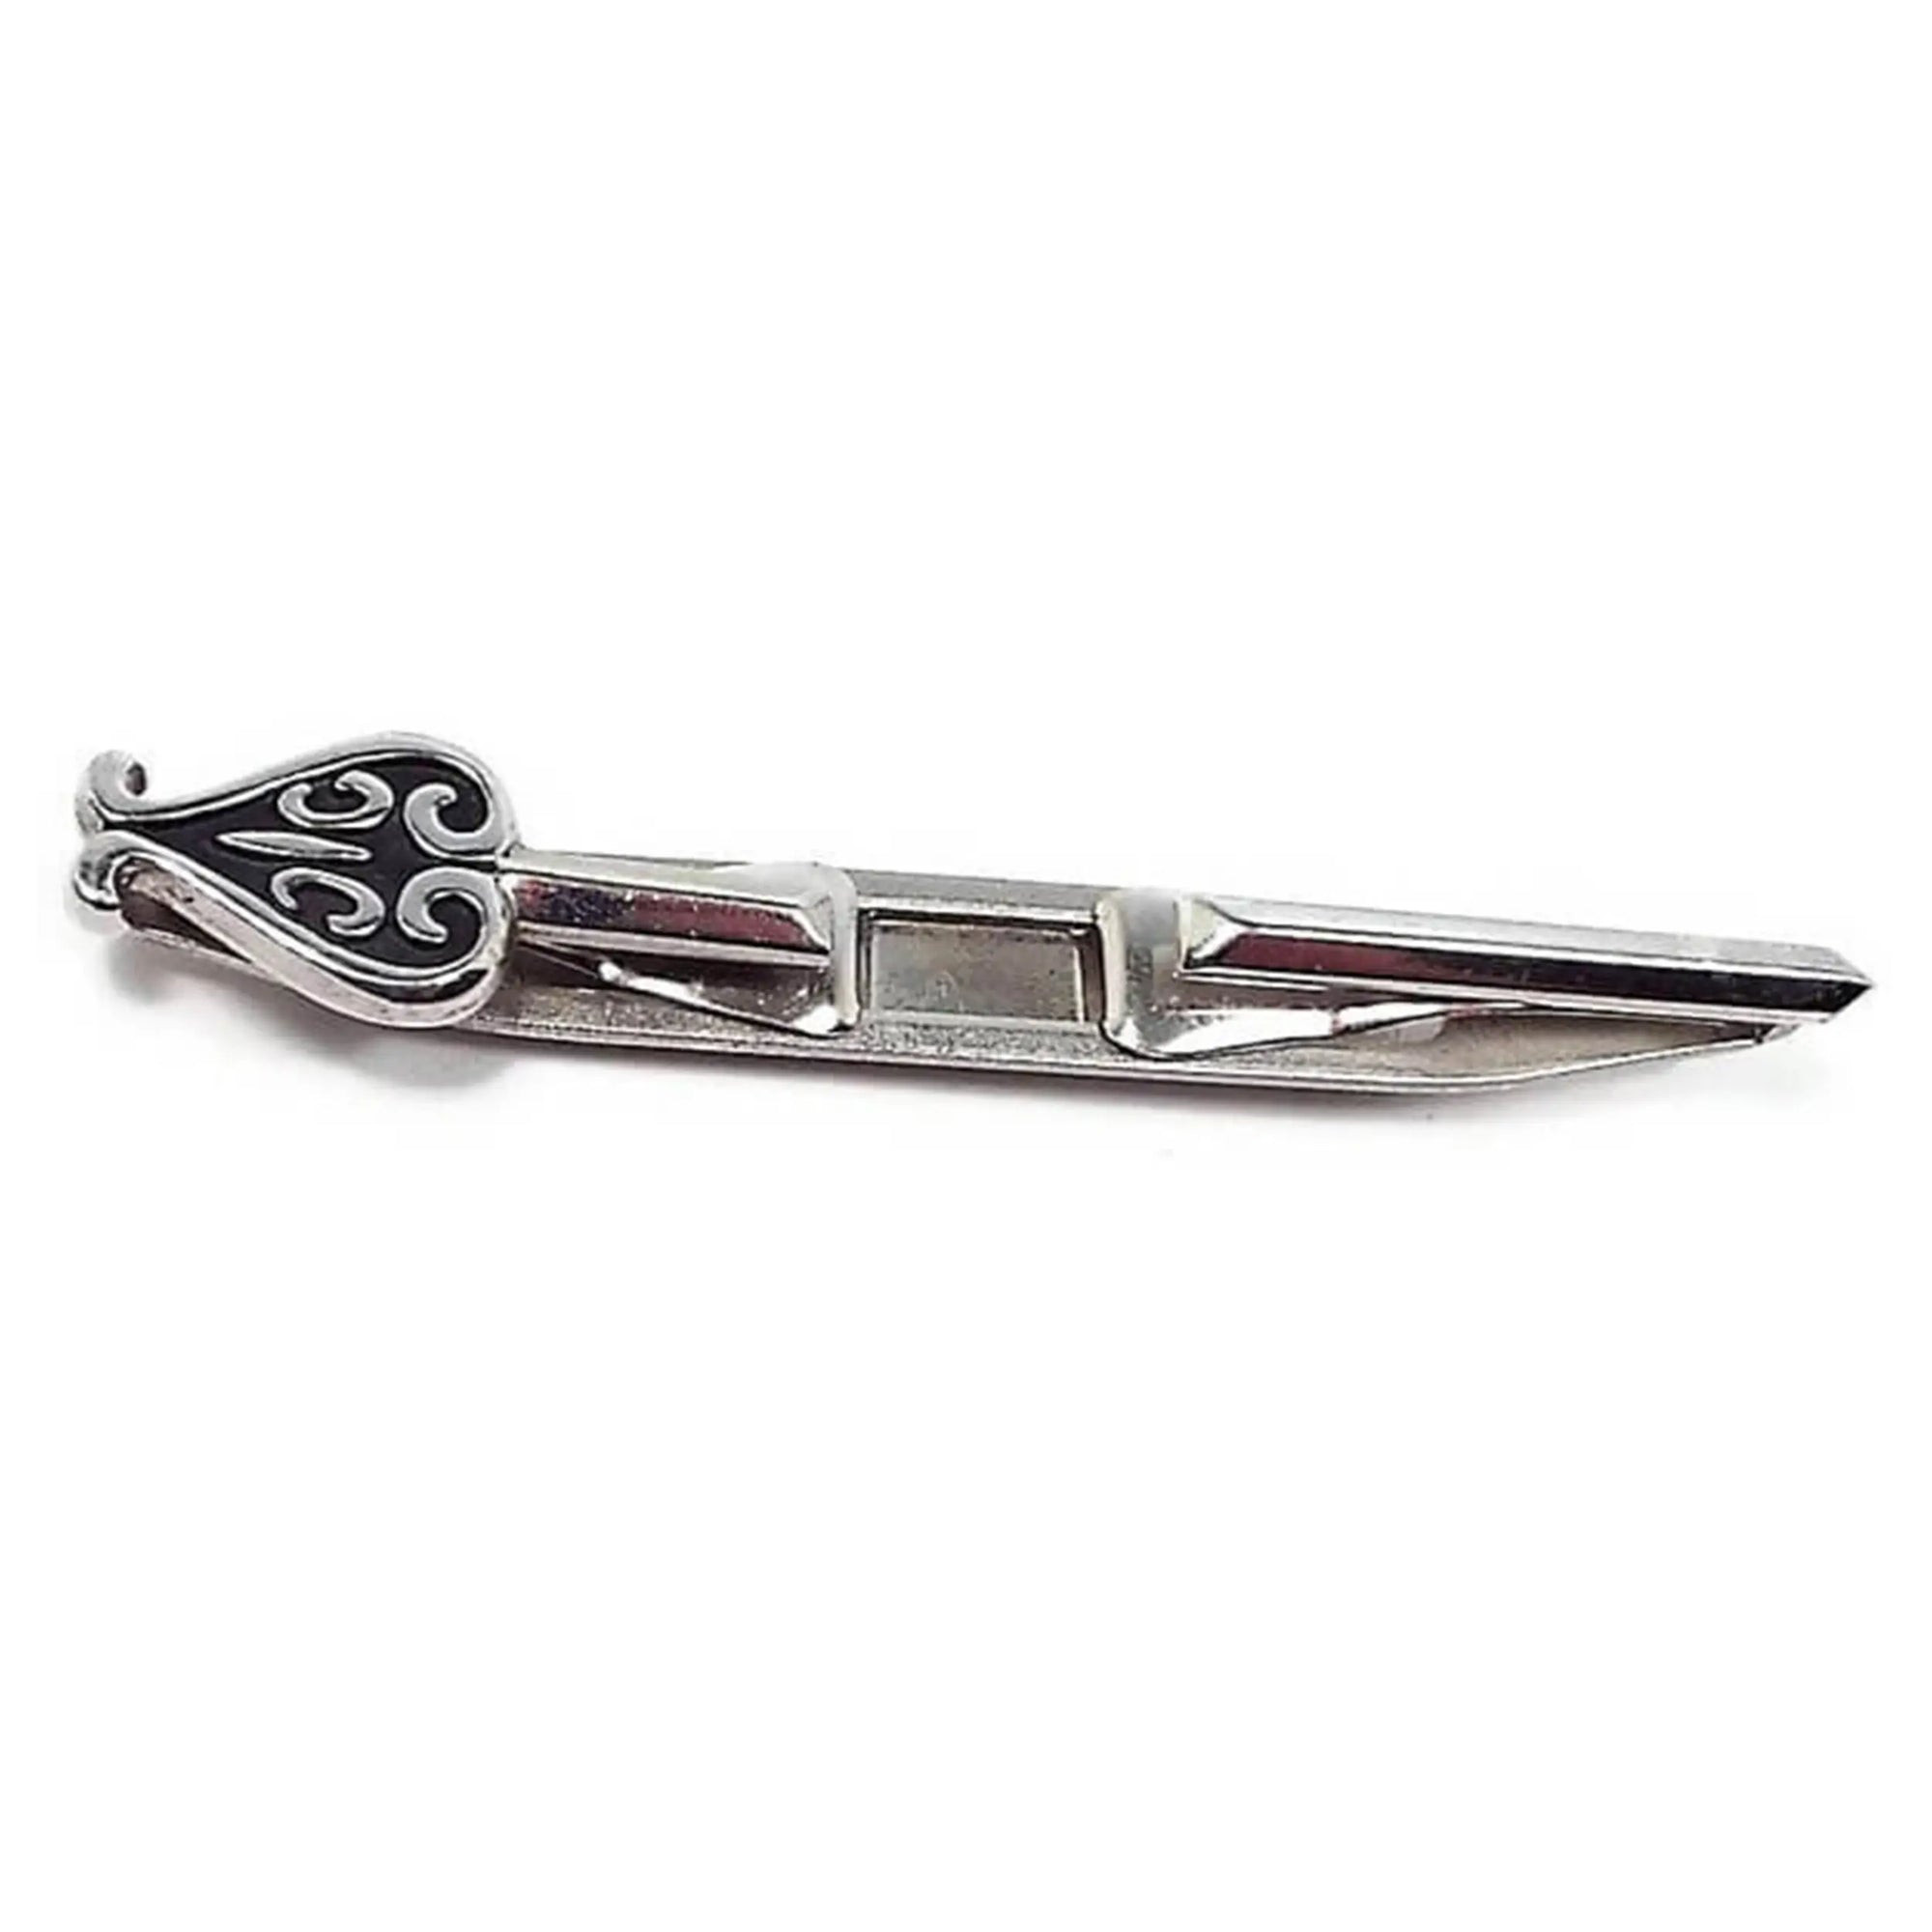 Front view of the Mid Century vintage Swank tie bar. The metal is silver tone in color. There is an open area in the middle for the ends to slide over each side of the tie. One end has a spade like design with black paint.